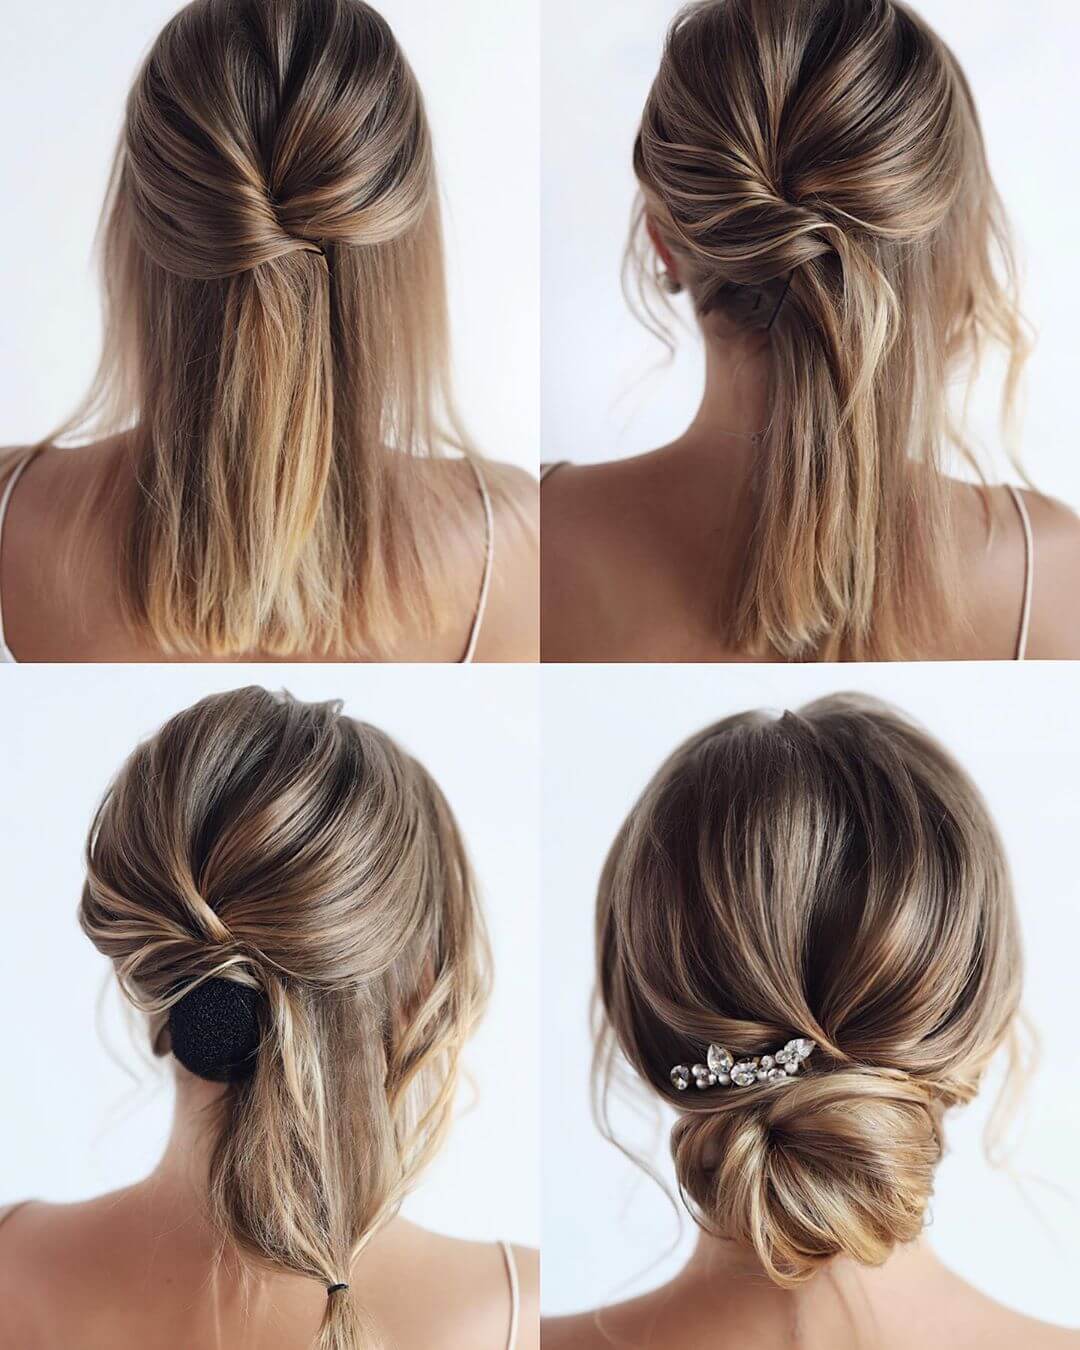 How to make a bun for short hair and hold it tight